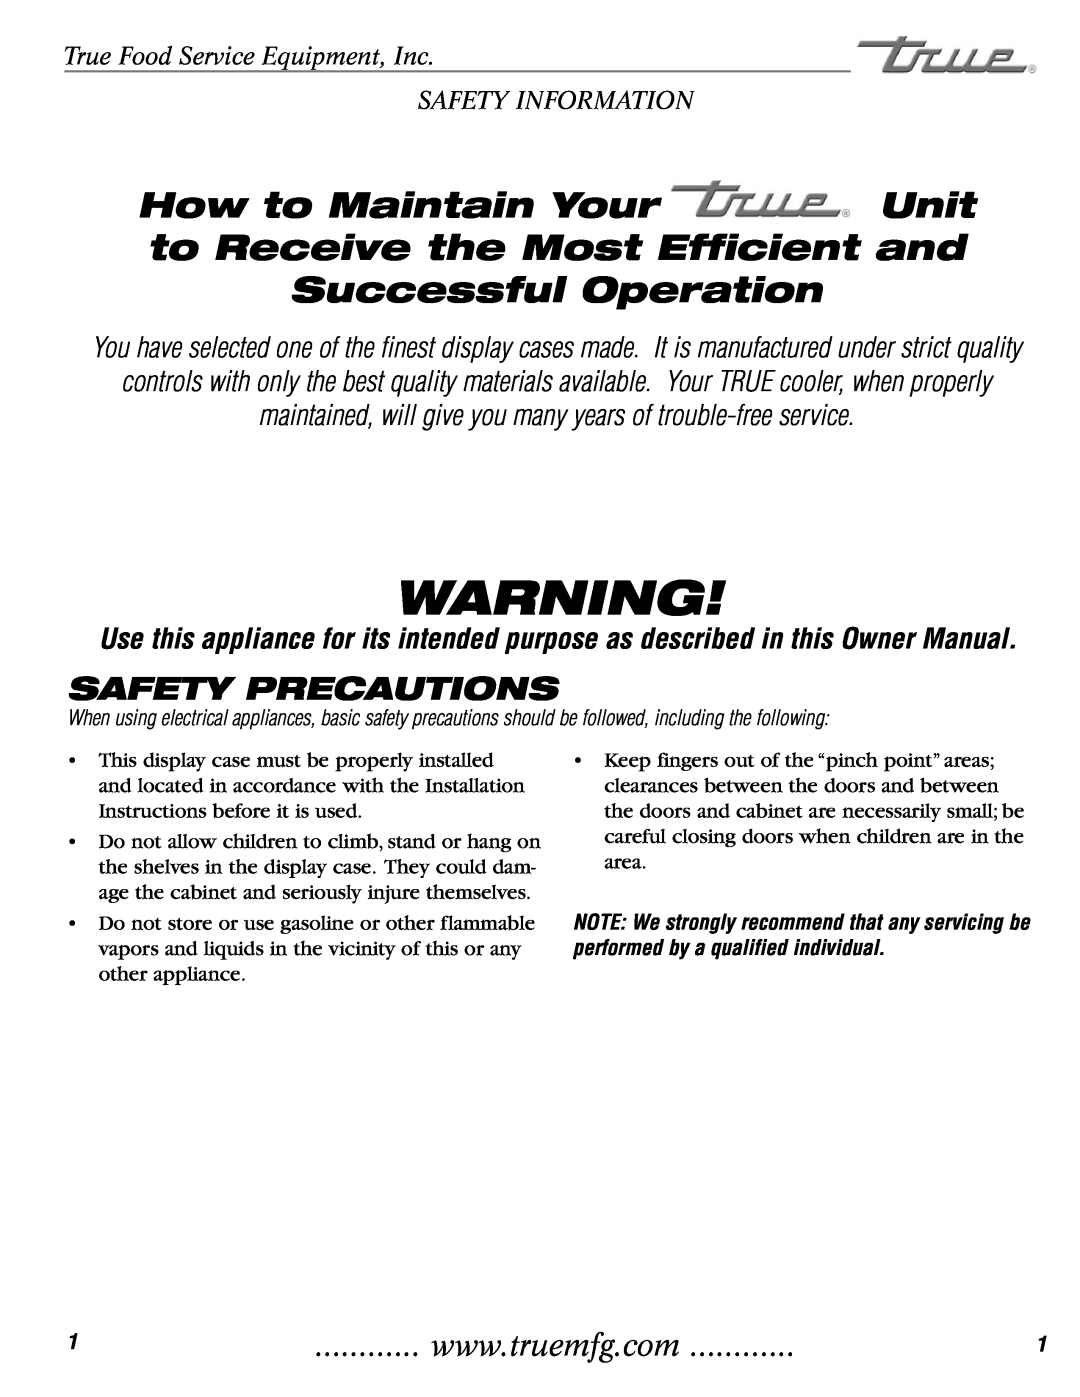 True Manufacturing Company TCGD-50 Safety Precautions, True Food Service Equipment, Inc SAFETY INFORMATION 